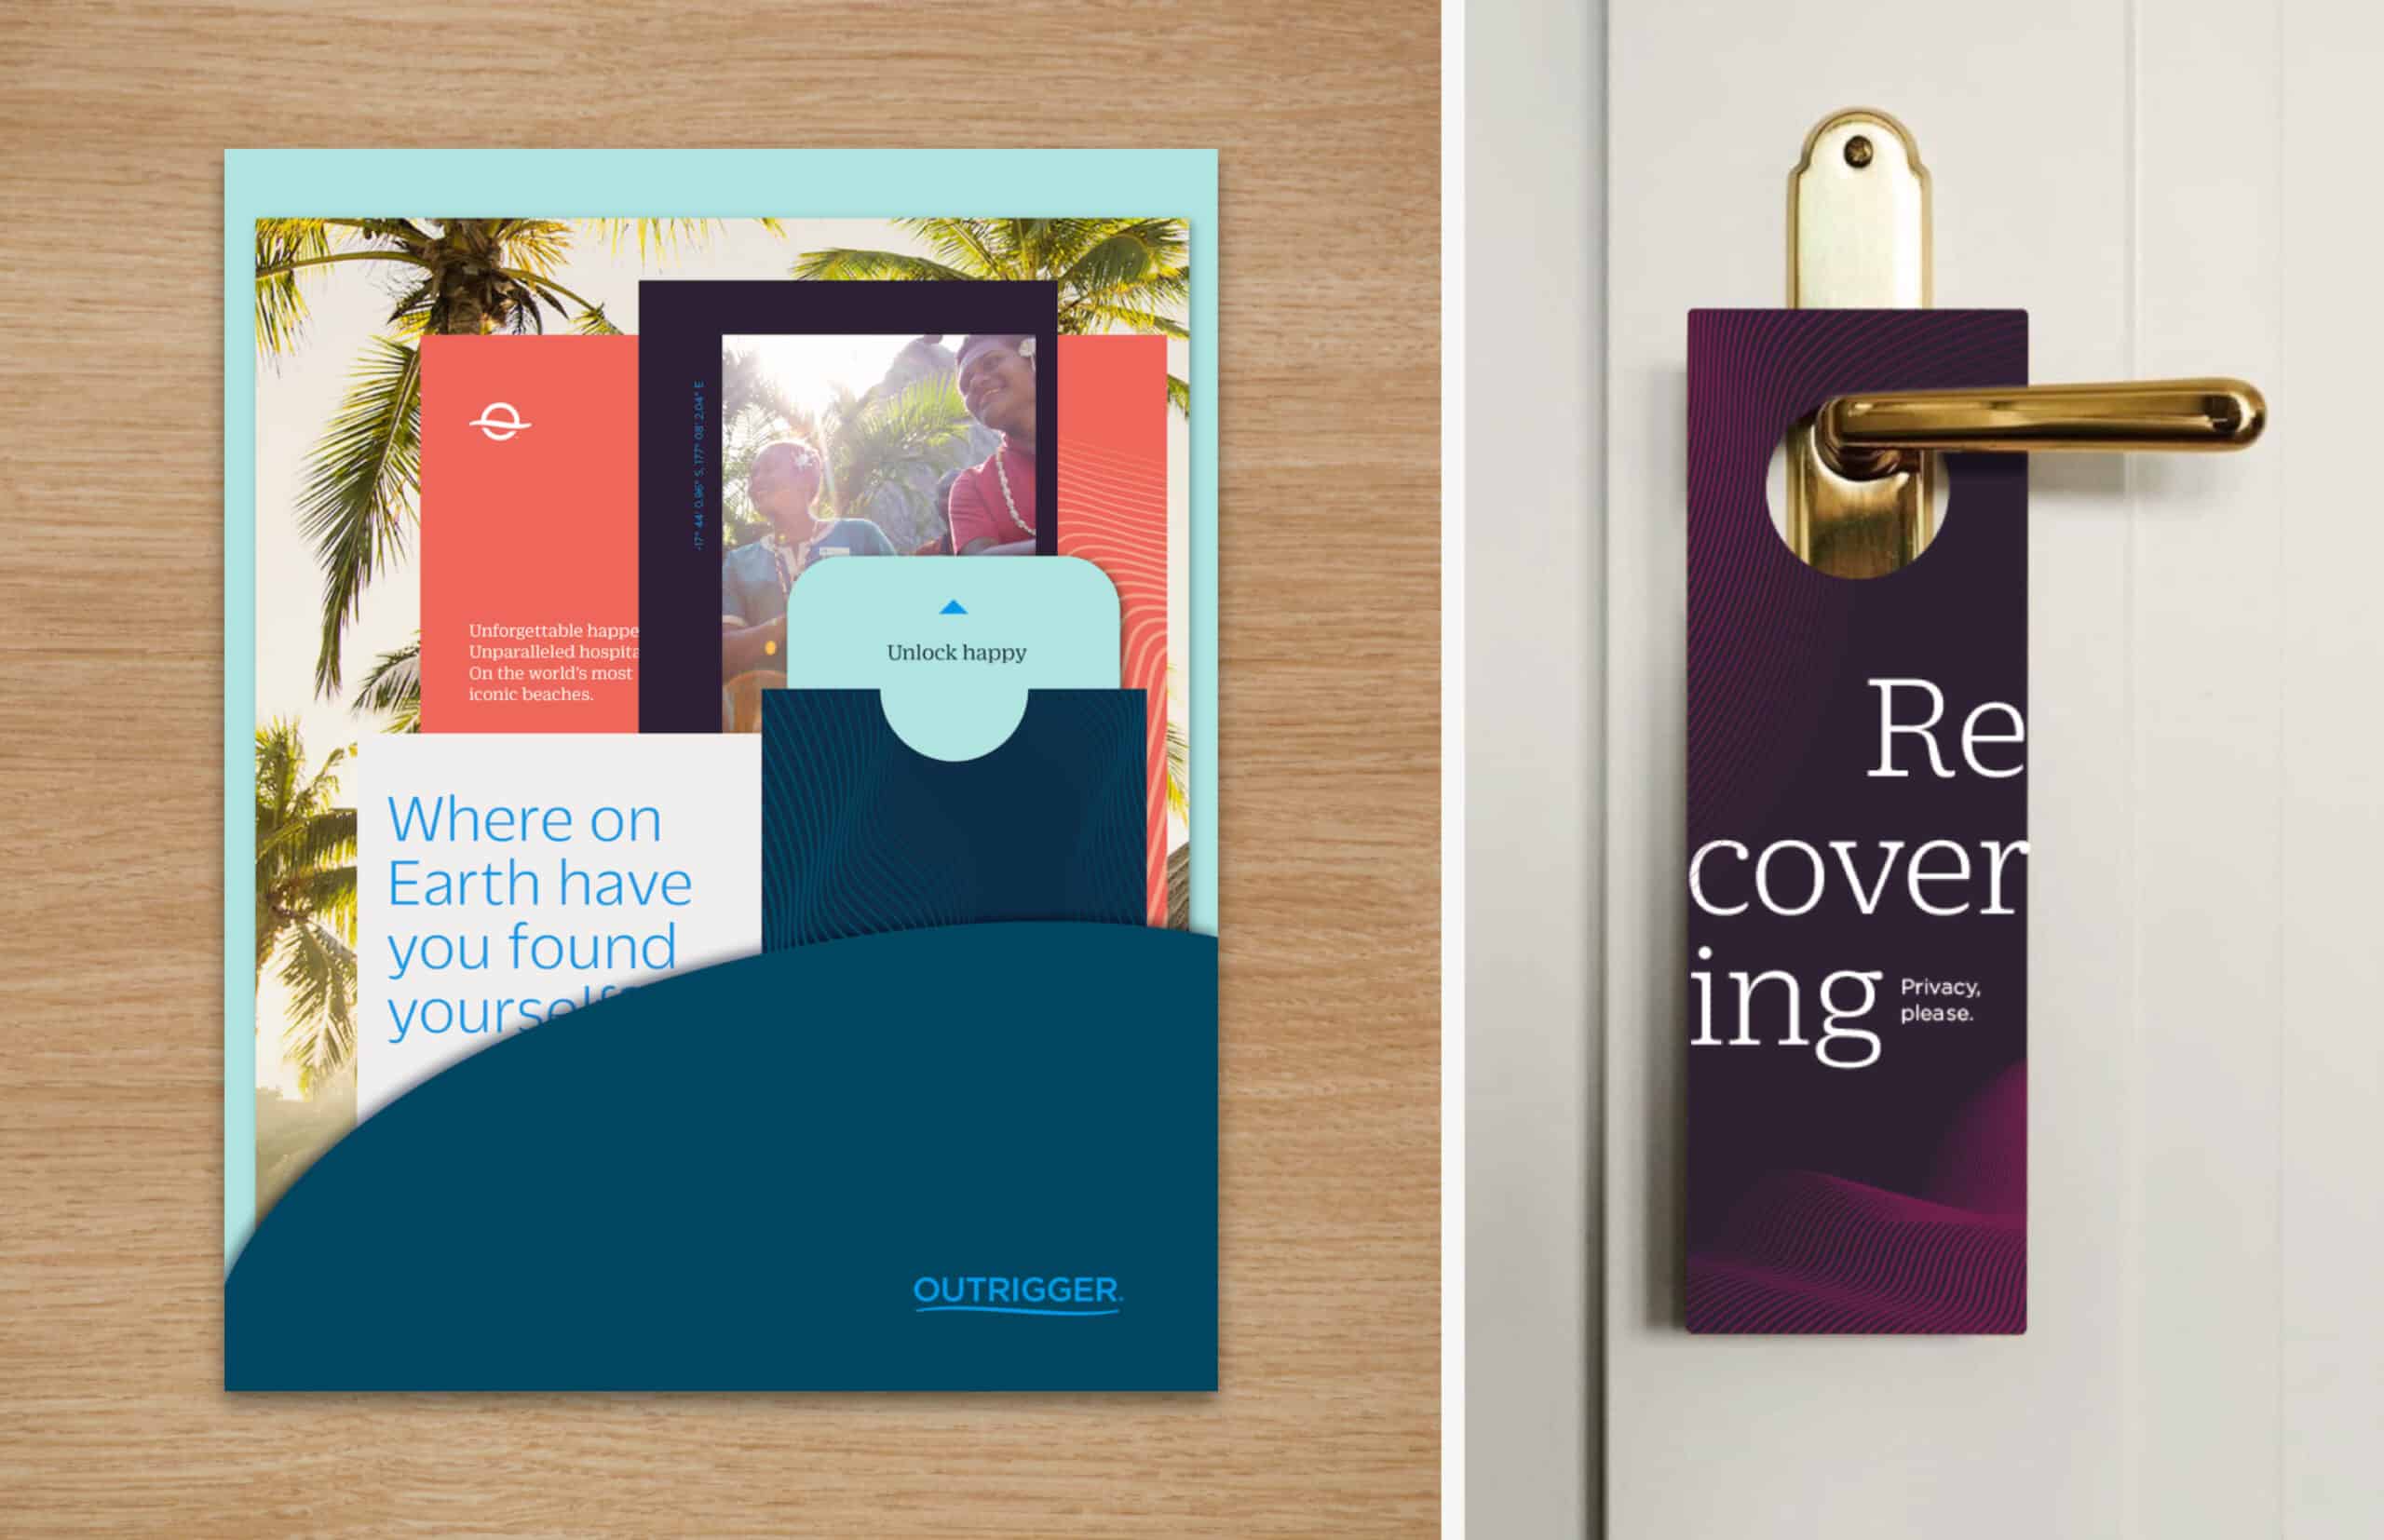 A two-pane image, left side is a hotel welcome packet folder, inside are various sizes of paper, the largest showing image of palm trees, topped by a coral page with the Outrigger O icon, on top of that is a smaller purple page with an image of two local team members wearing flowers behind their ears, topped by a blue key card case and white key card reading, “Unlock happy” next to a white page with blue font reading, “Where on Earth have you found yourself”, right pane shows a hotel door sign reading, “Recovering Privacy please.”